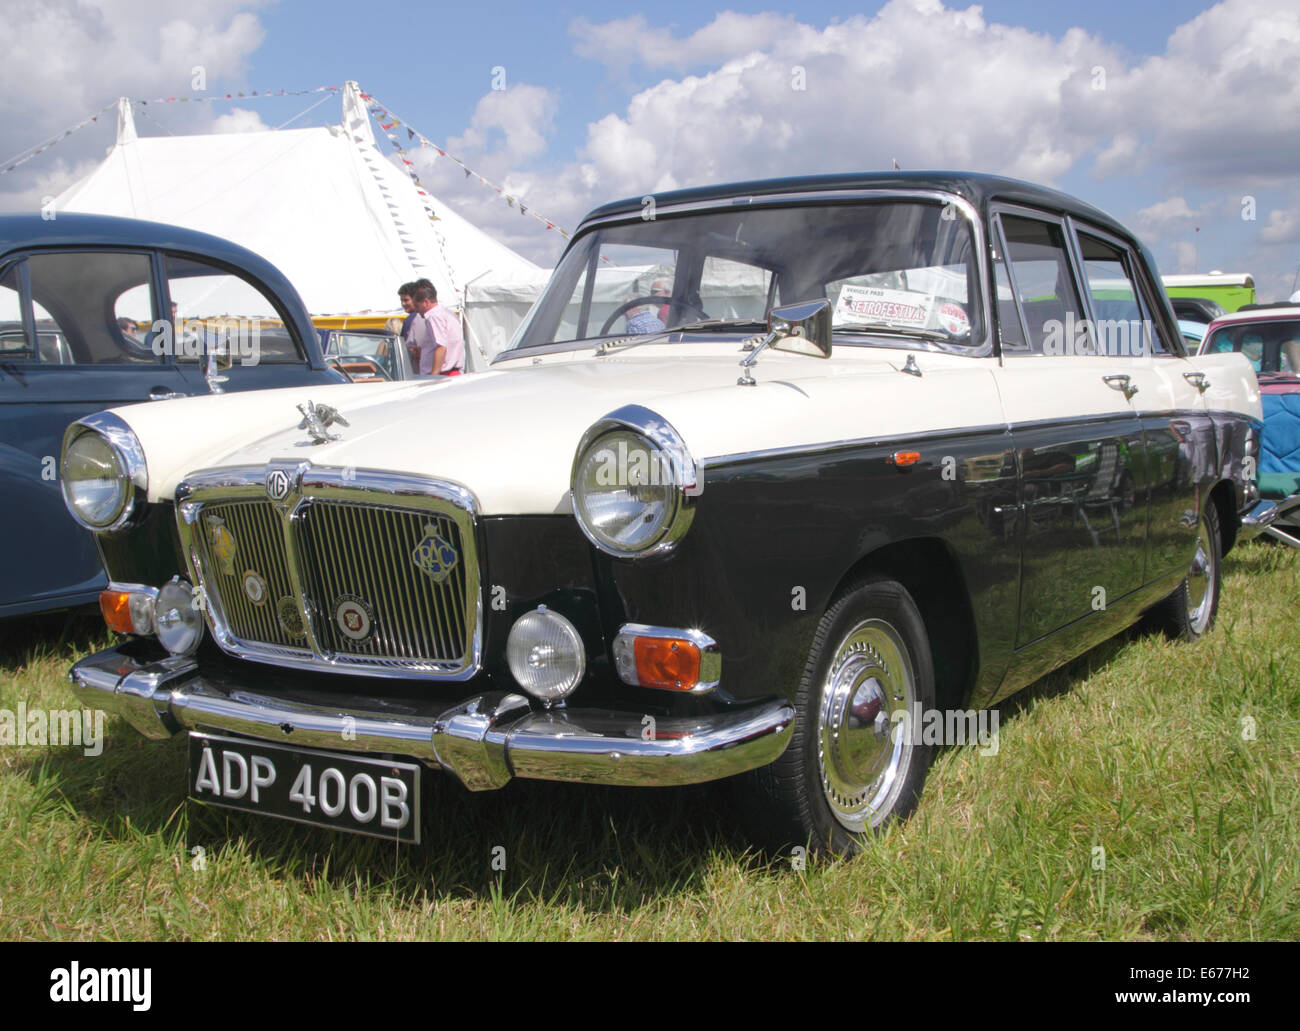 Mg magnette stock and images - Alamy